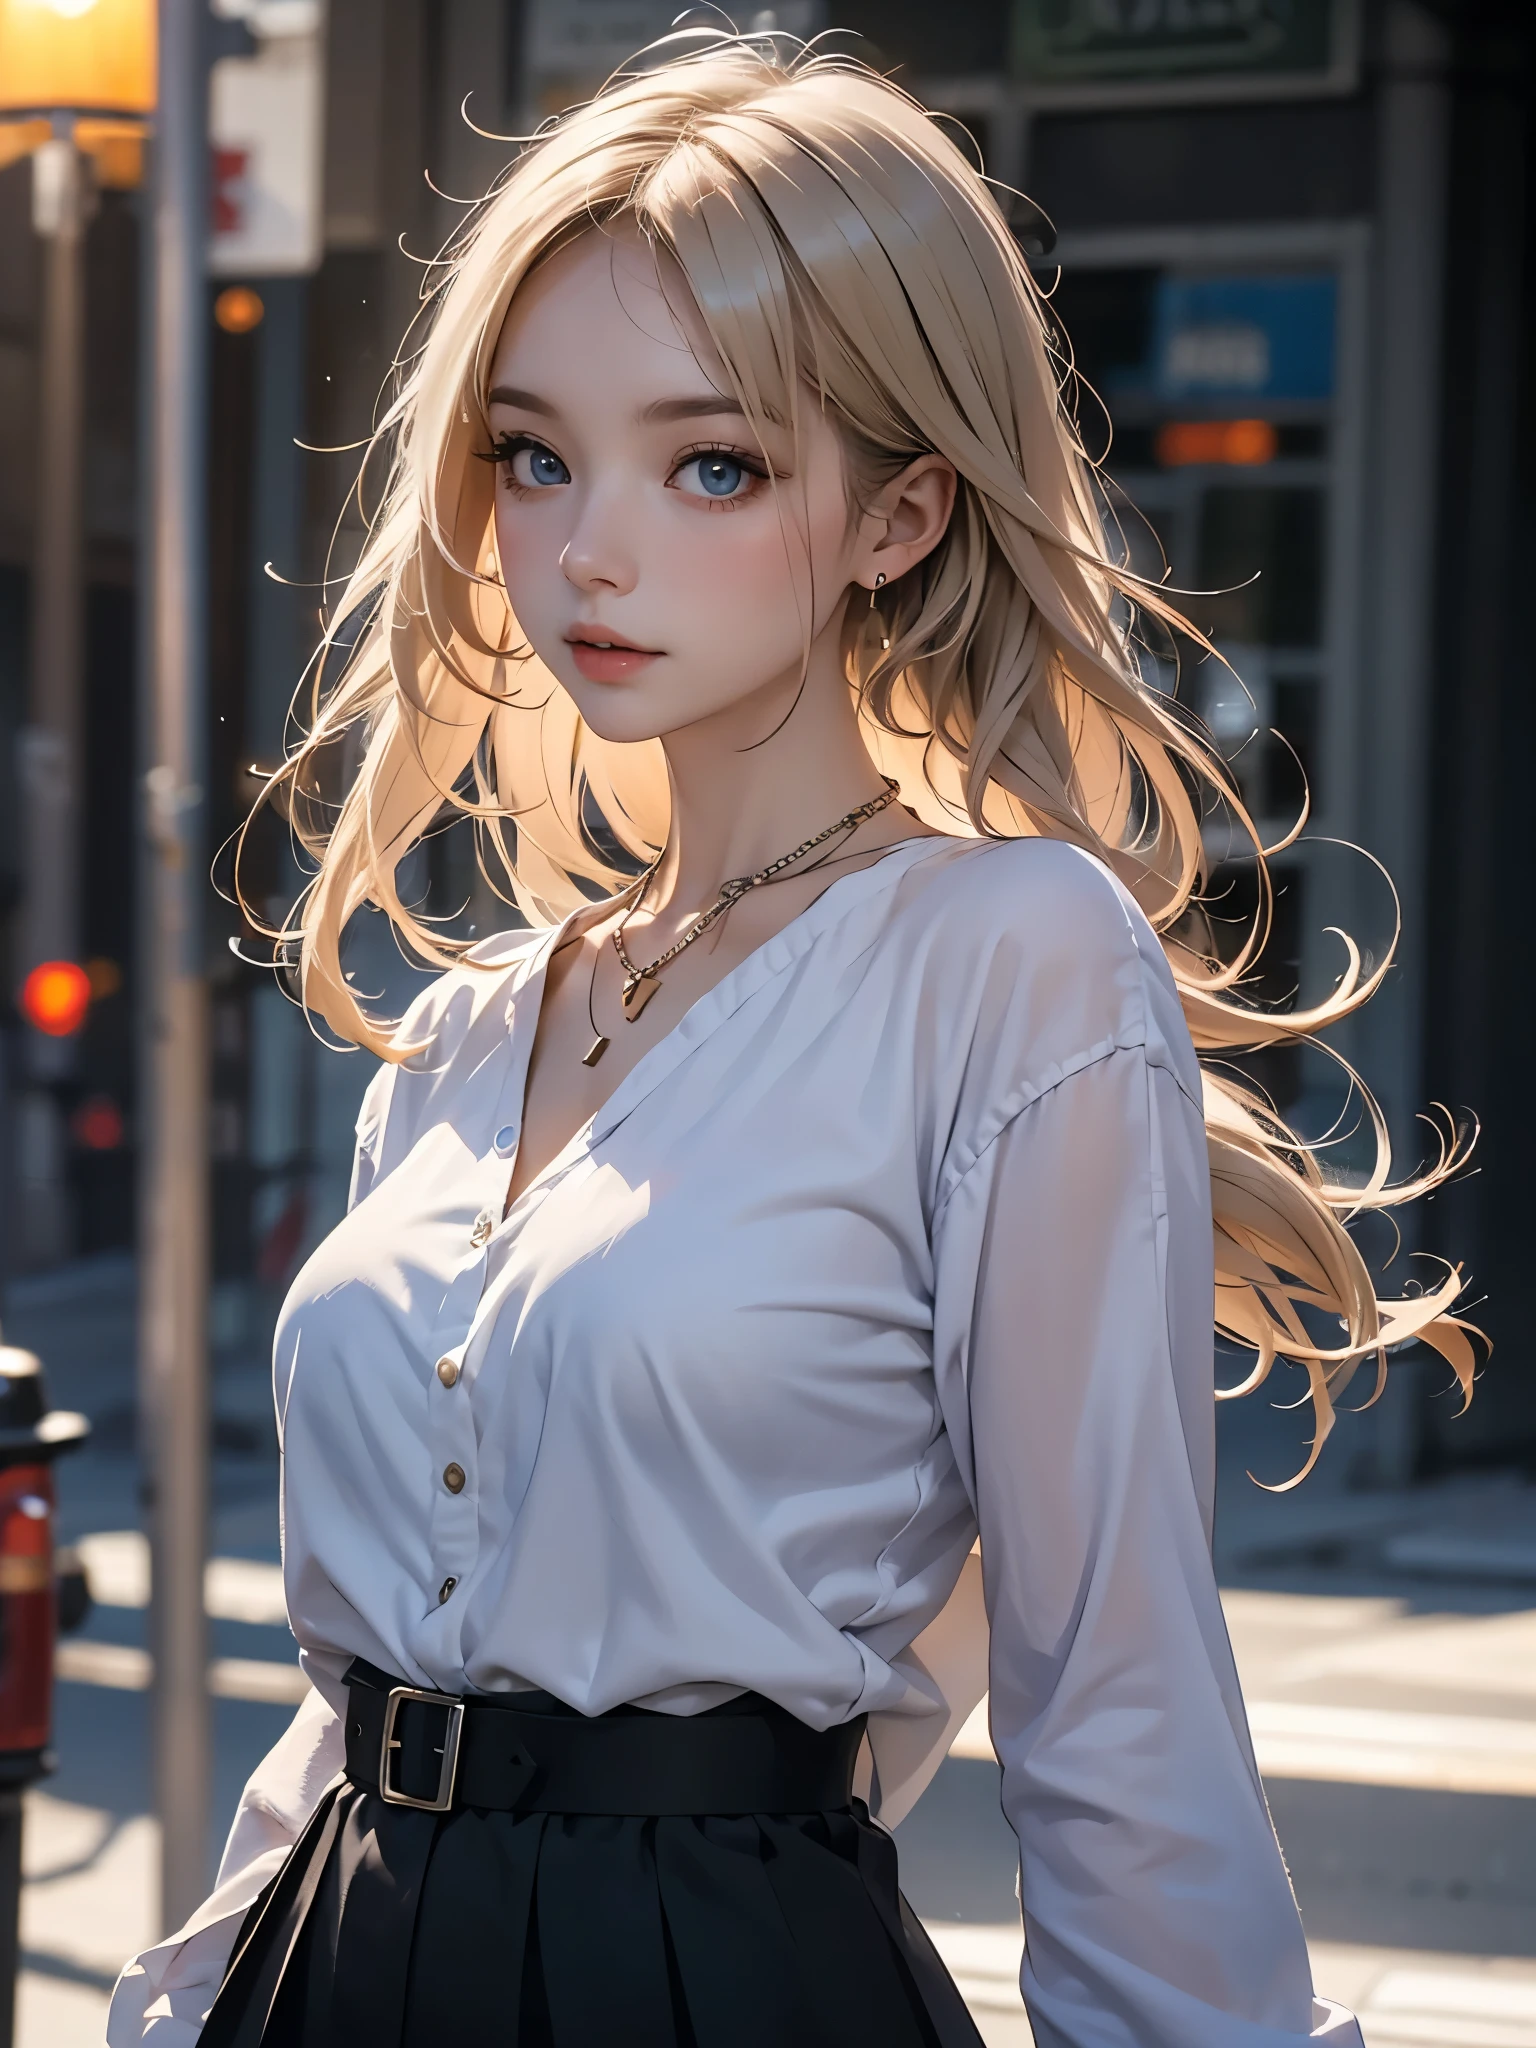 best quality, masterpiece, high resolution, A girl, blond, blue eyes, Fashion Clothing, necklace, jewelry, Pretty Face, Perfect breasts, more than_Body, Tyndall effect, lifelike, Dark Studio, Side light, Two-color lighting, (HD Skin:1.2), 8K Ultra HD, SLR camera, Soft Light, high quality, Volumetric Lighting, frank, photography, high resolution, 4K, 8k, Bokeh,